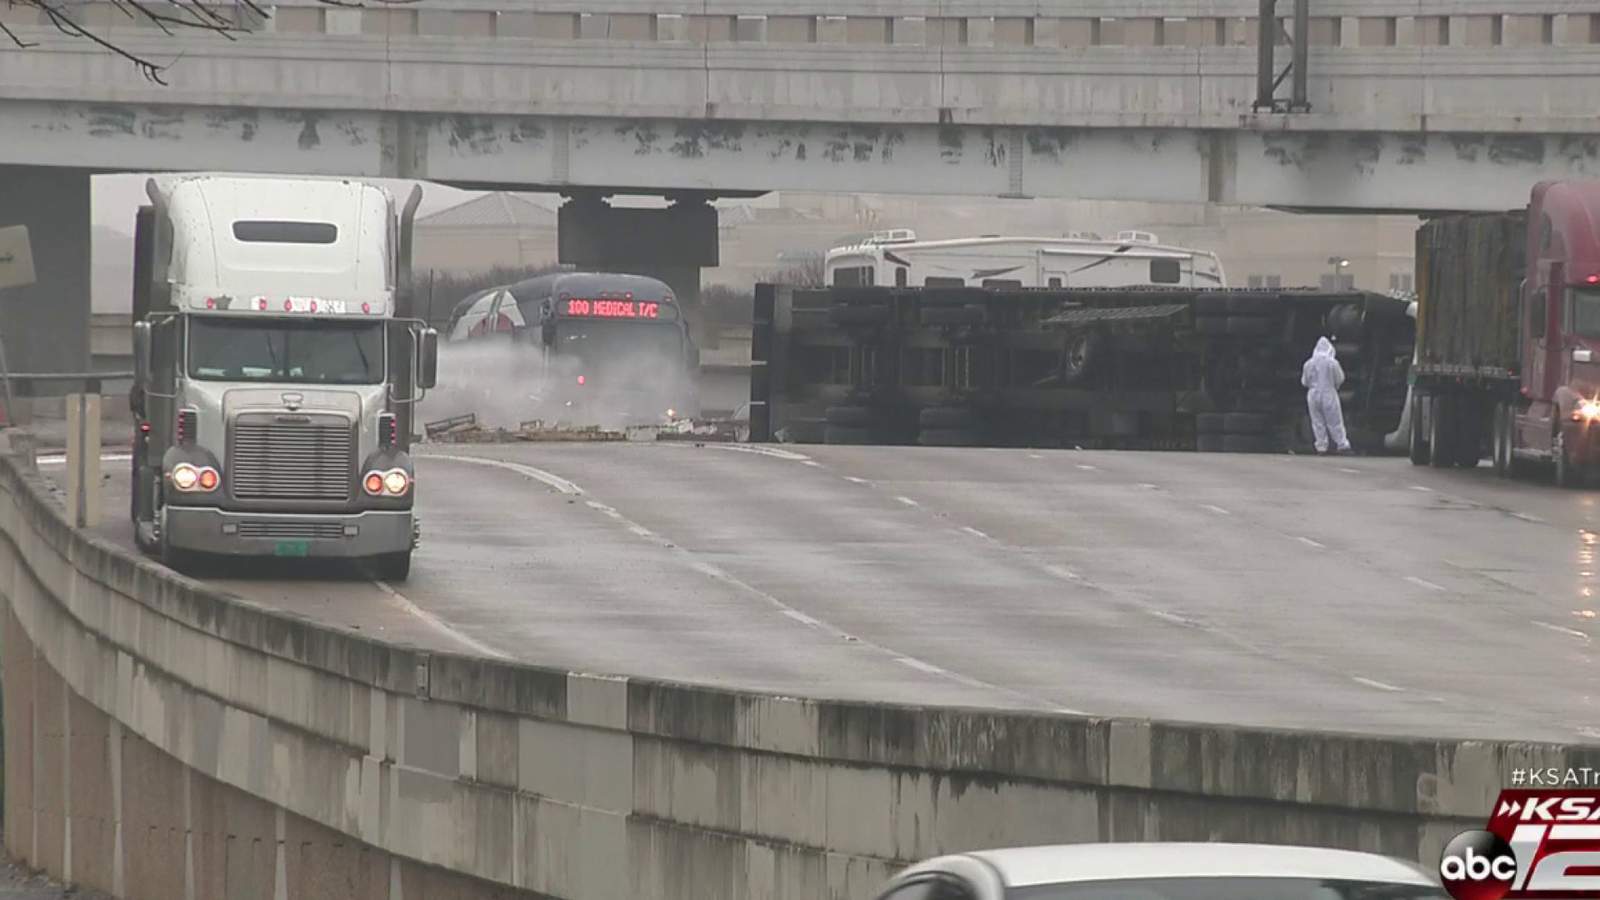 18-wheeler carrying load of honeybees flips, causes road closure near downtown